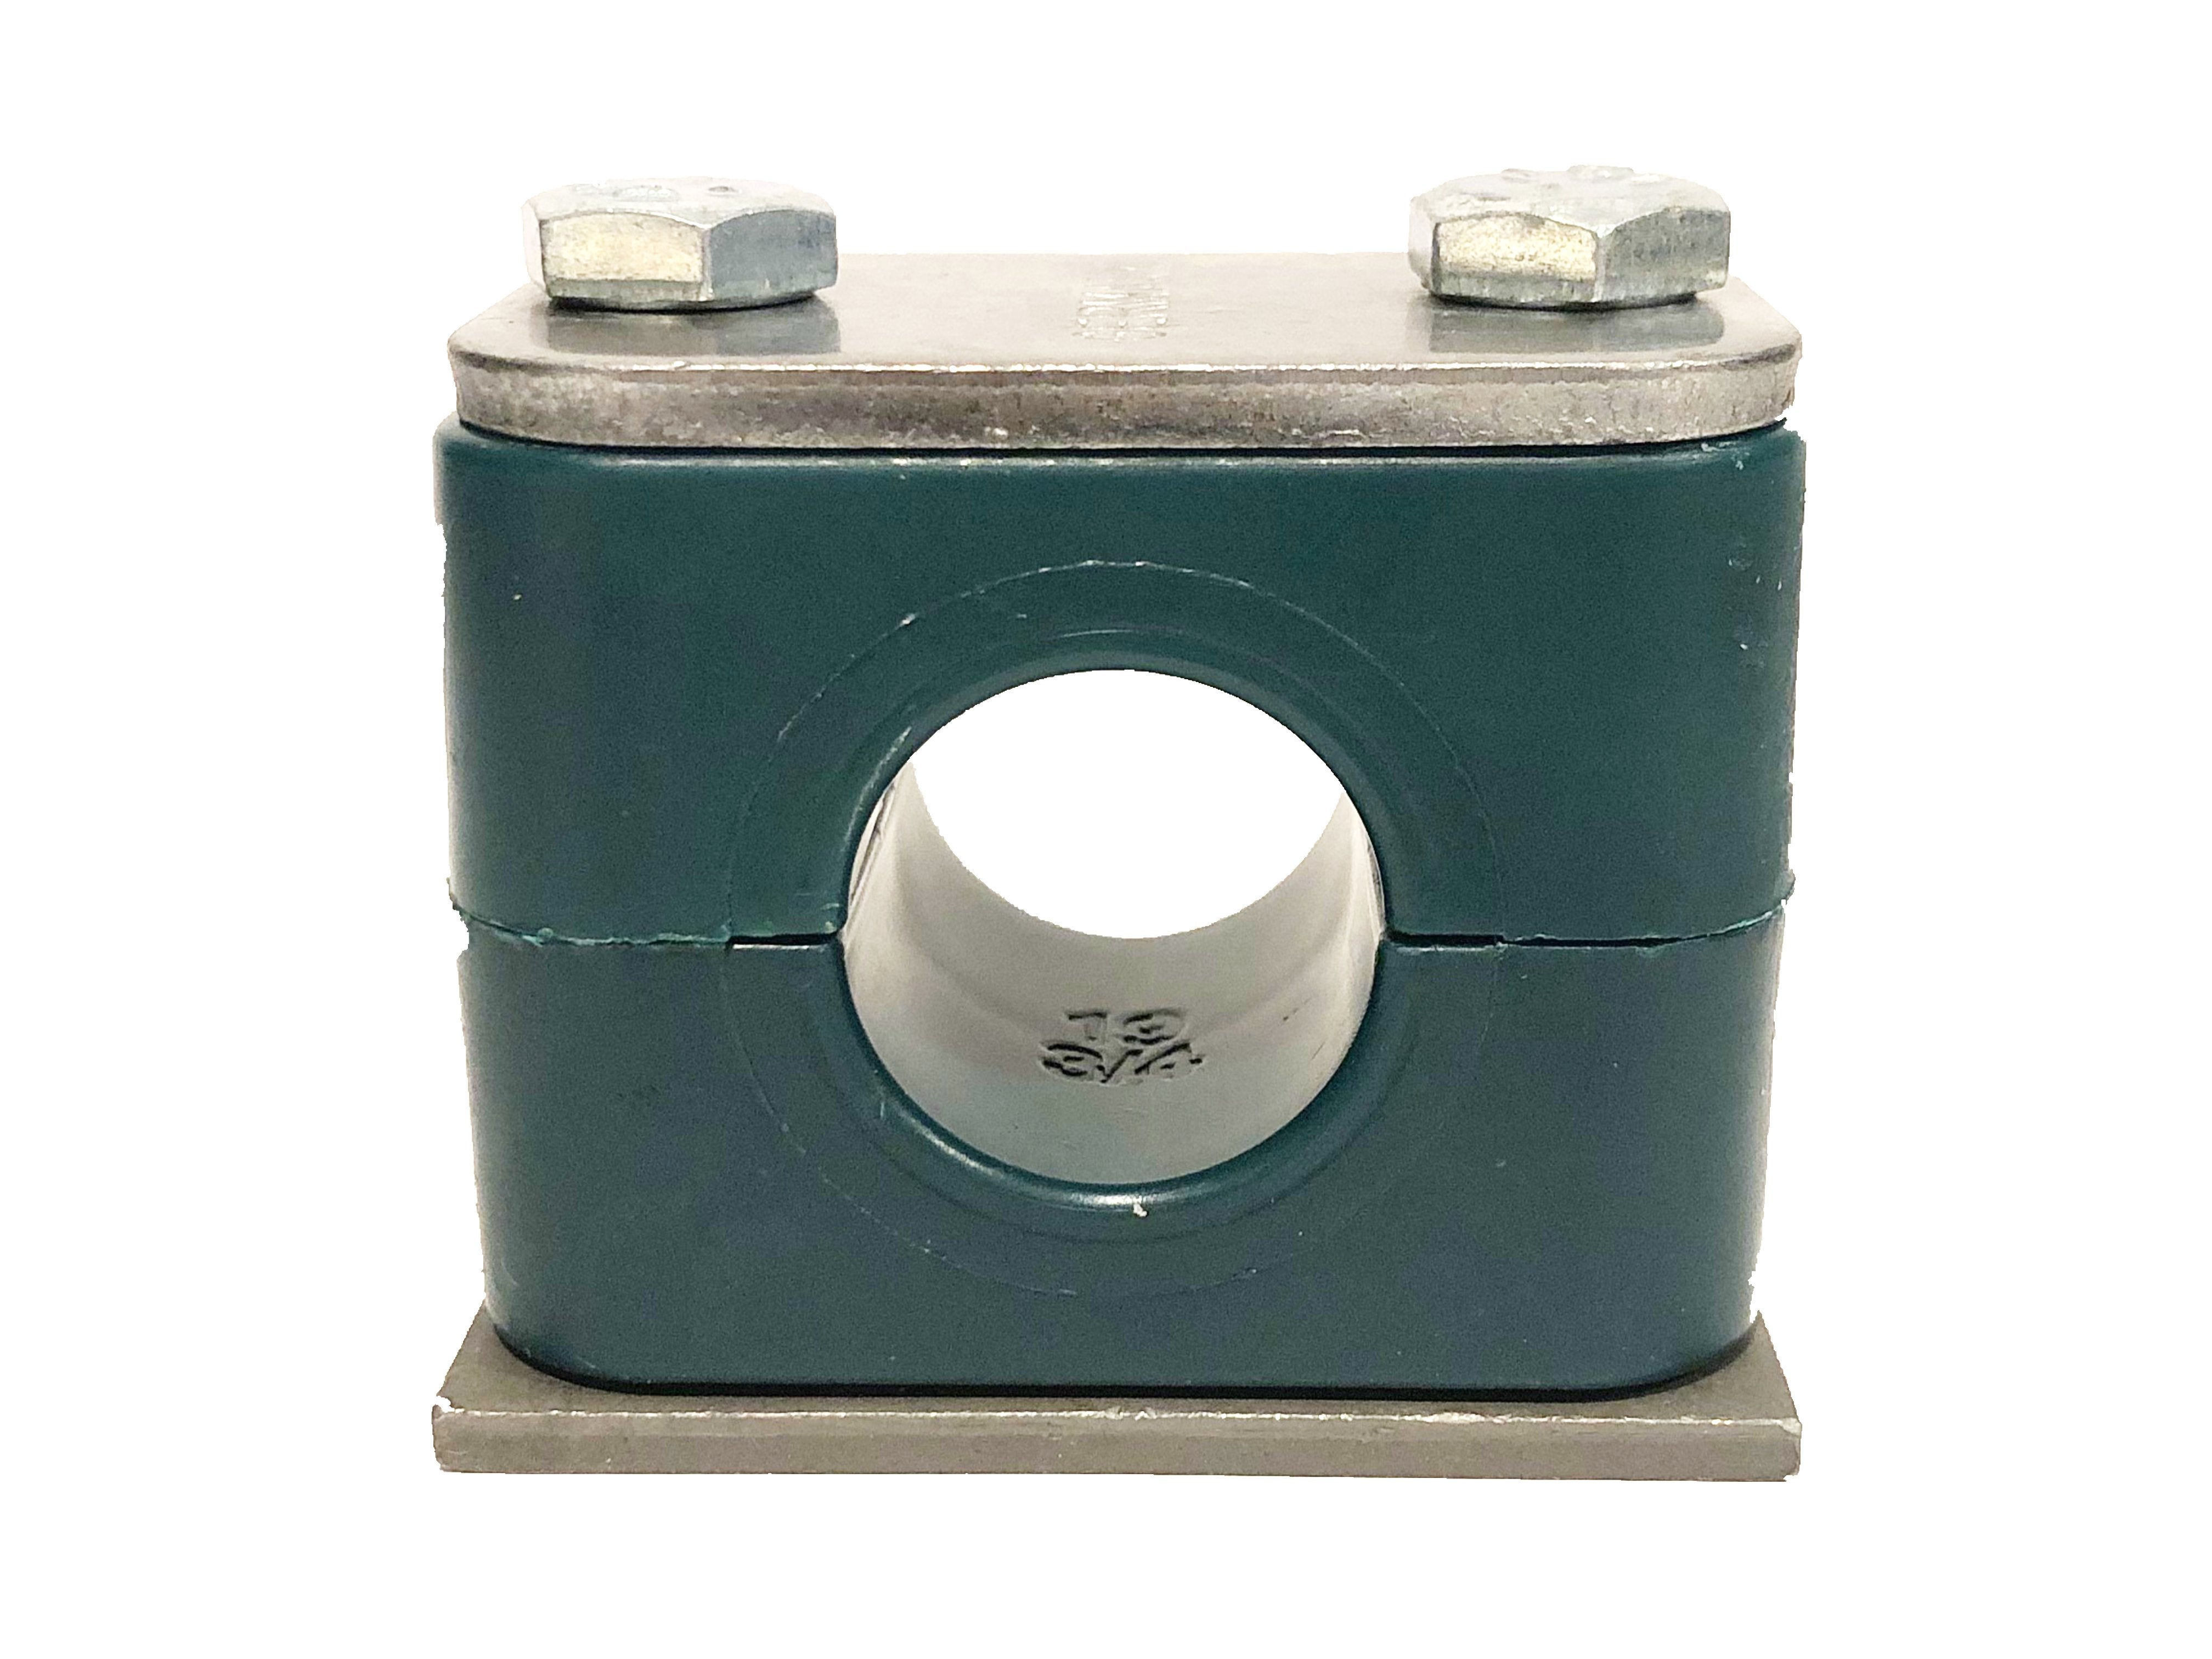 SP-321.3-PP-H-DP-AS-U-W5 : Stauff Clamp, Single Weld Plate, 0.84" (21.3mm) OD, for 1/2" Pipe, Green PP Insert, Smooth Interior, 316SS